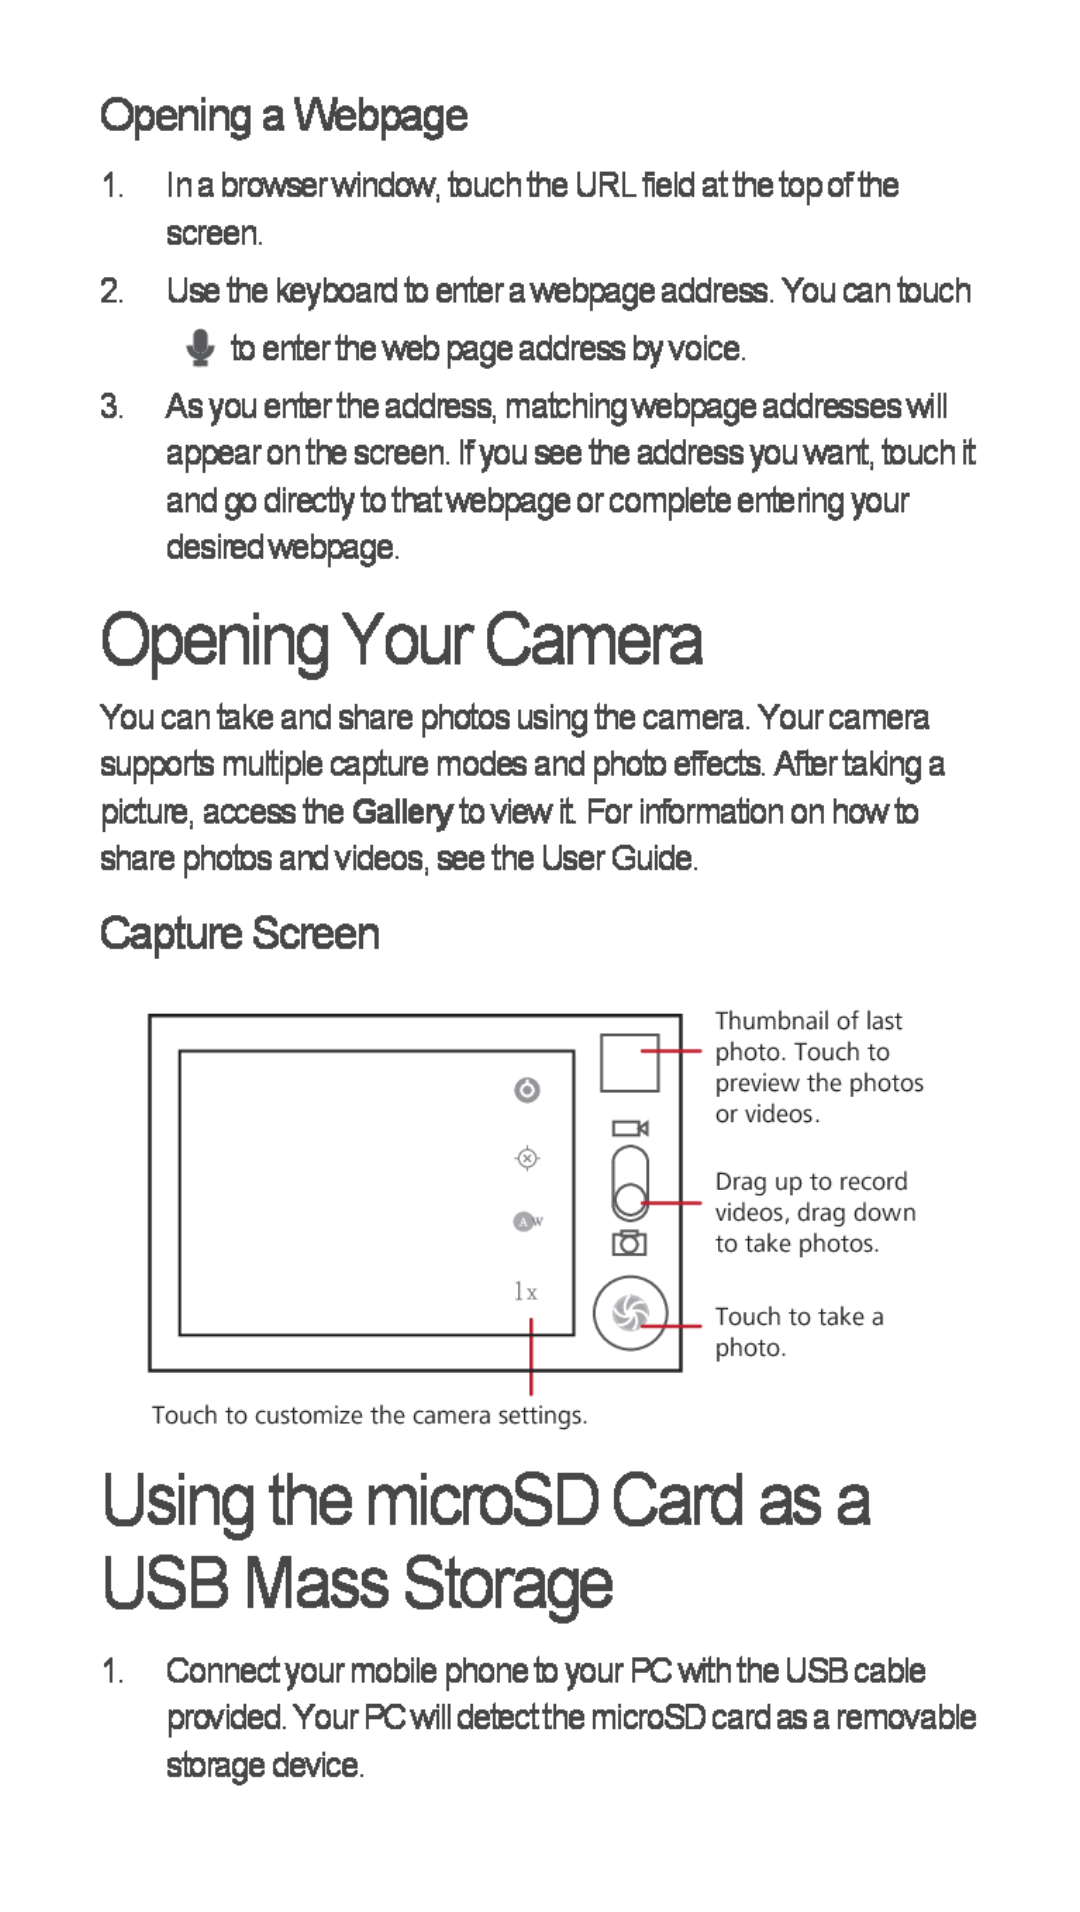 Huawei U8655-1 Opening Your Camera, Using the microSD Card as a USB Mass Storage, Opening a Webpage, Capture Screen 